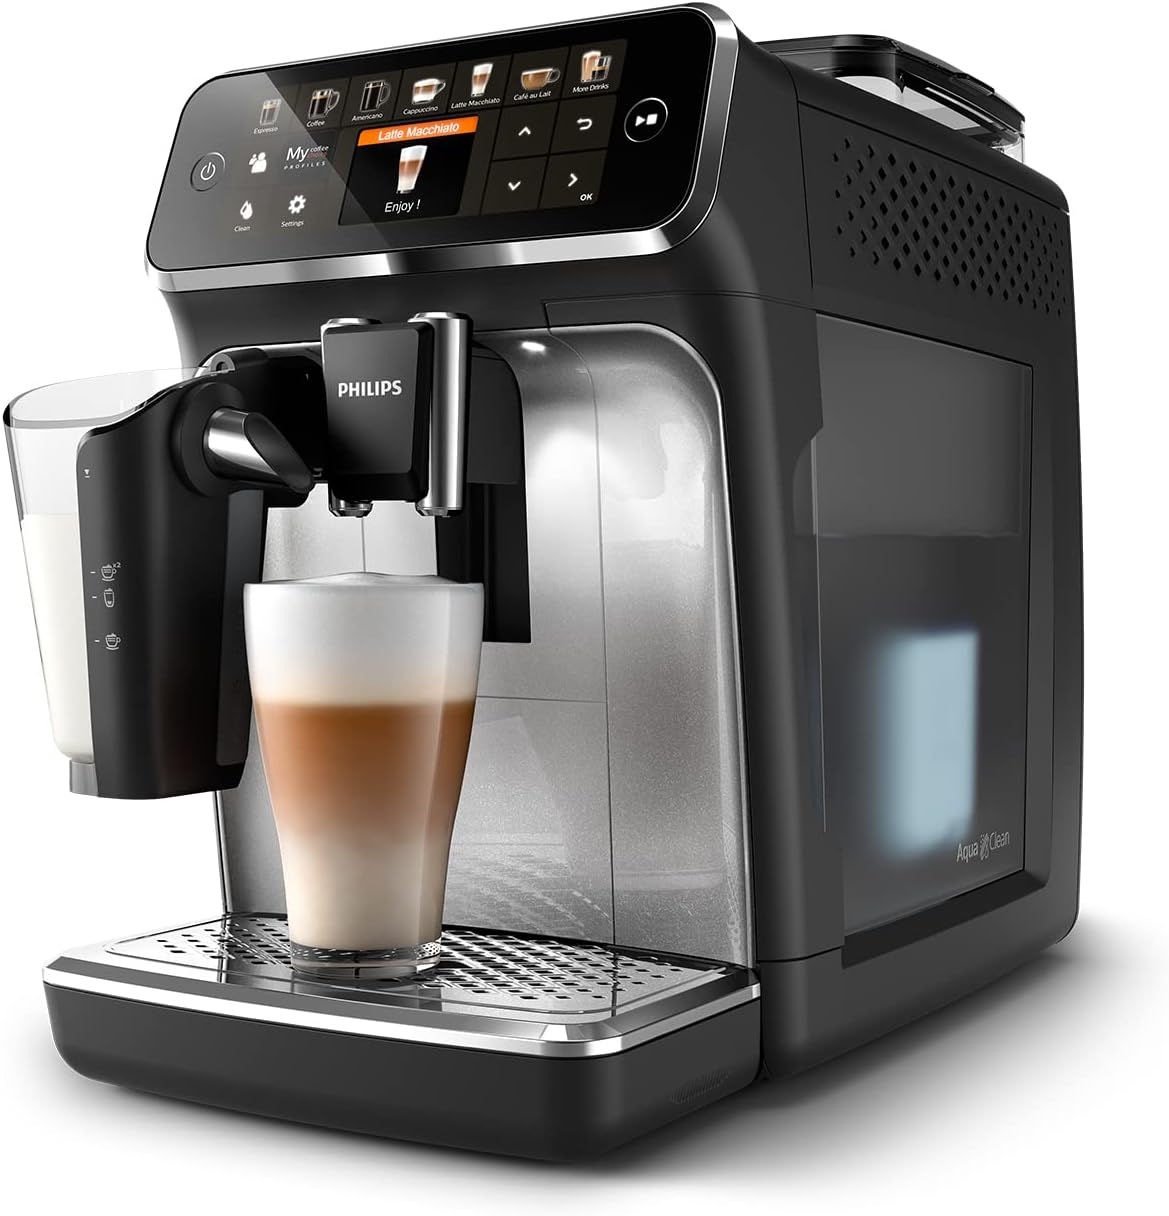 Philips 5400 Series Bean - to - Cup Espresso Machine - LatteGo Milk Frother, 12 Coffee Varieties, 4 User Profiles, Intuitive Display, Silver (EP5446/70) - Amazing Gadgets Outlet